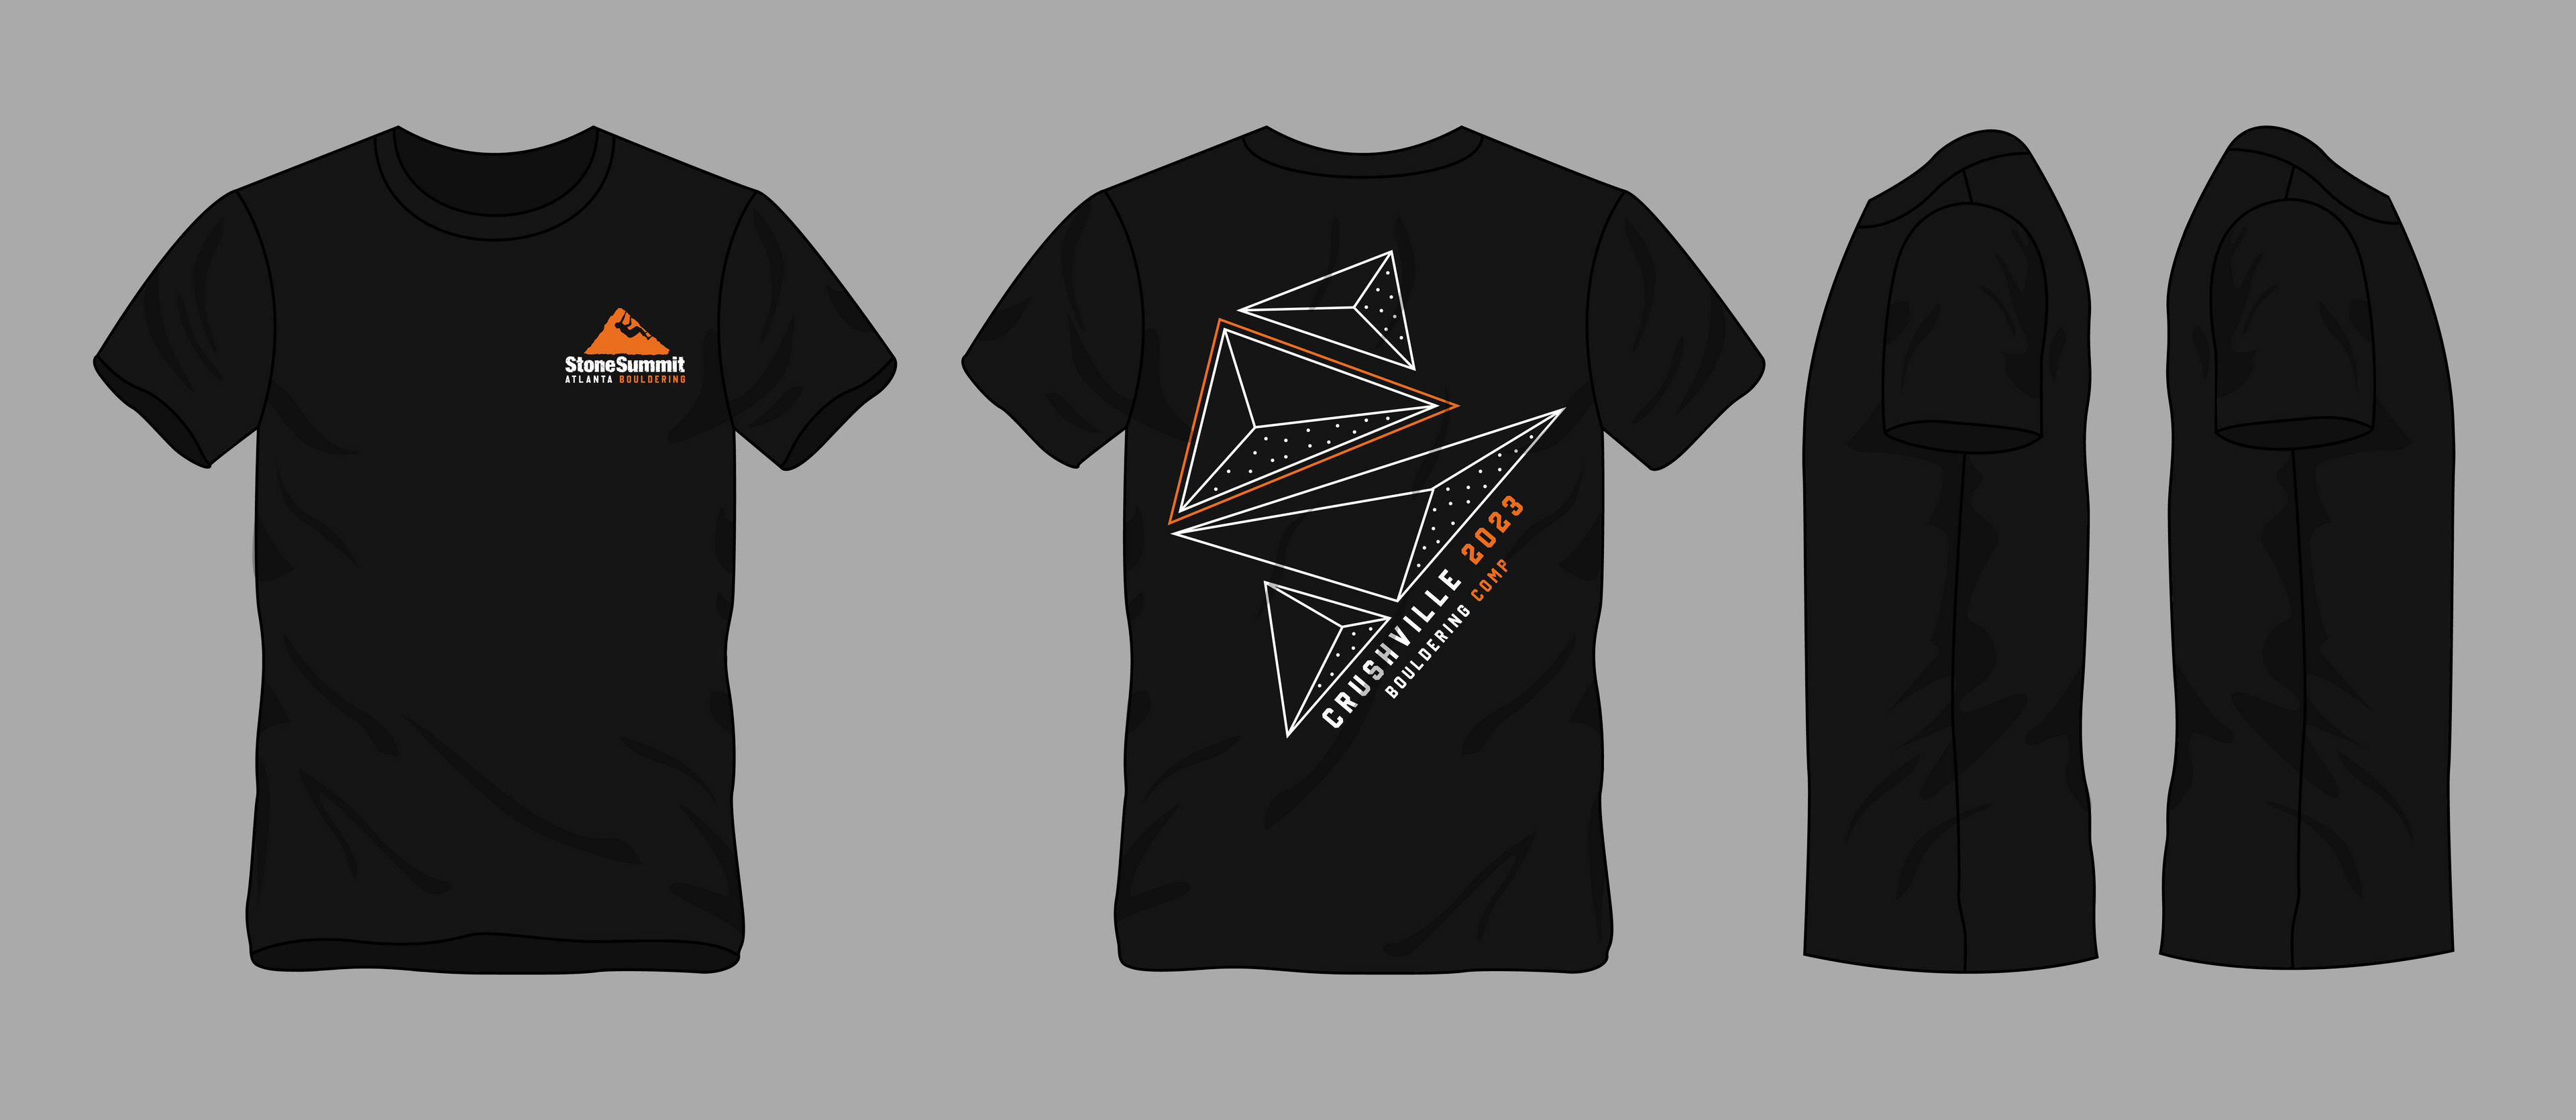 2023 T-shirt design for Stone Summit Climbing and Fitness Center's annual Crushville  bouldering competition.